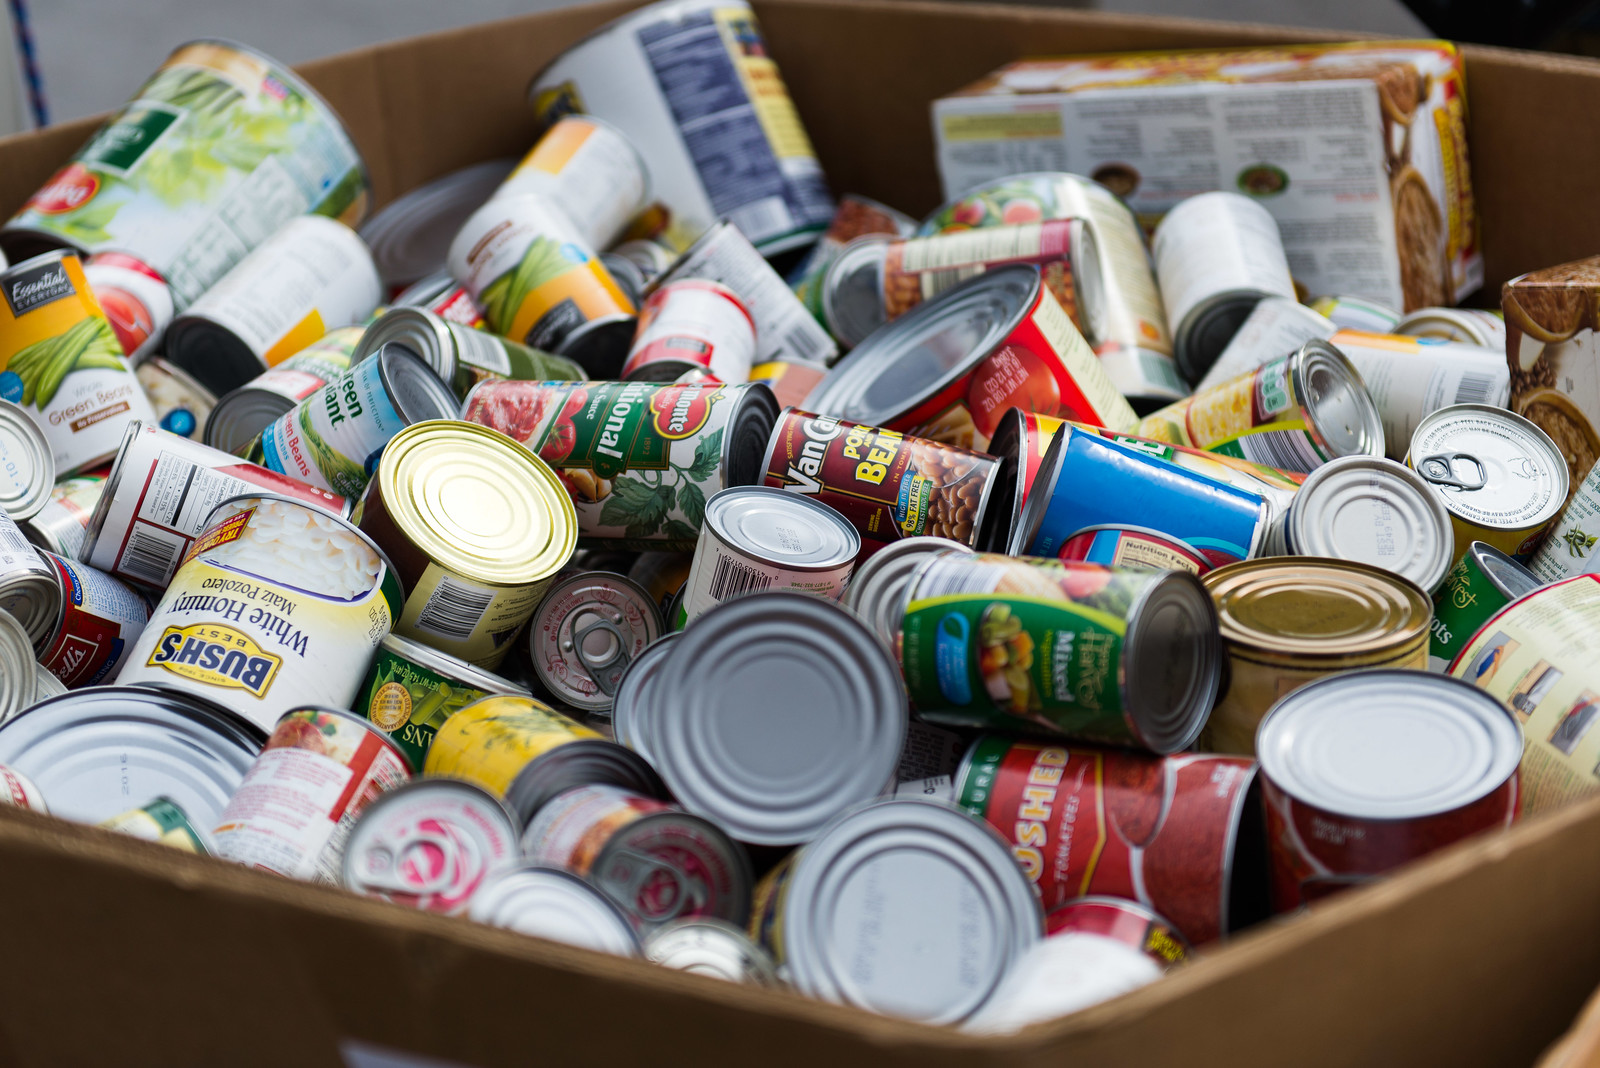 A box full of canned goods.